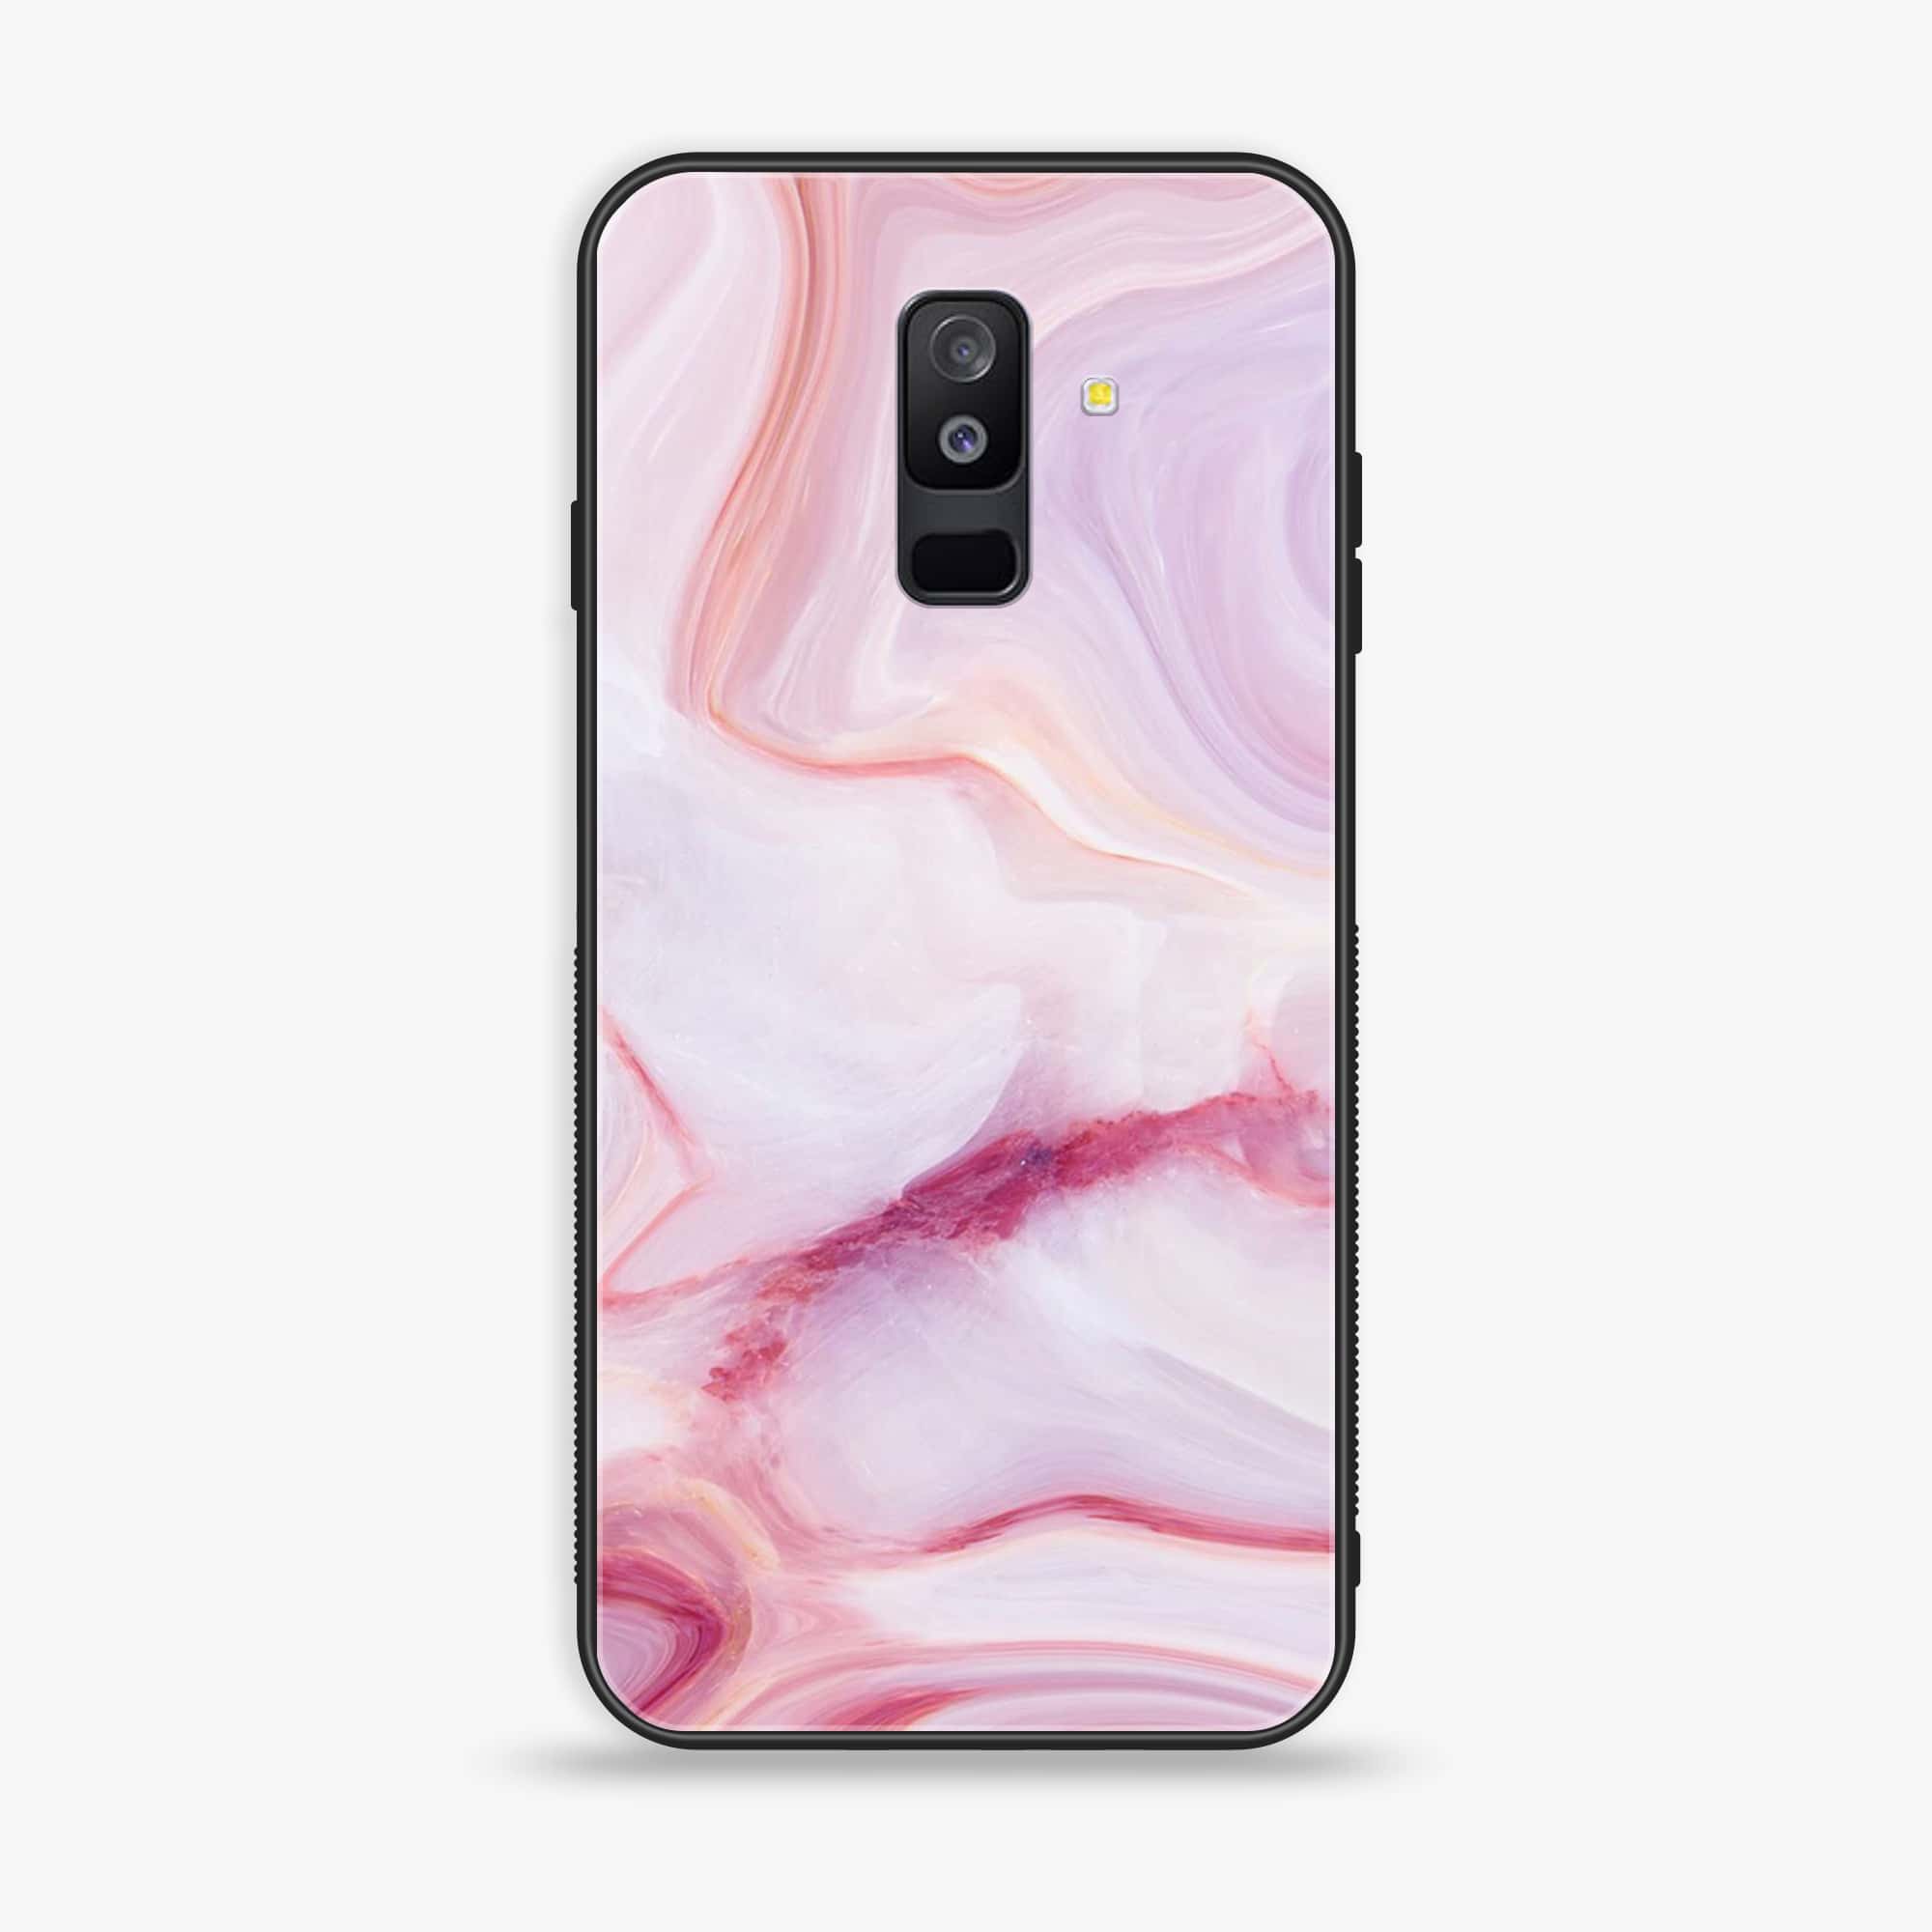 Samsung Galaxy A6 Plus (2018) - Pink Marble Series - Premium Printed Glass soft Bumper shock Proof Case